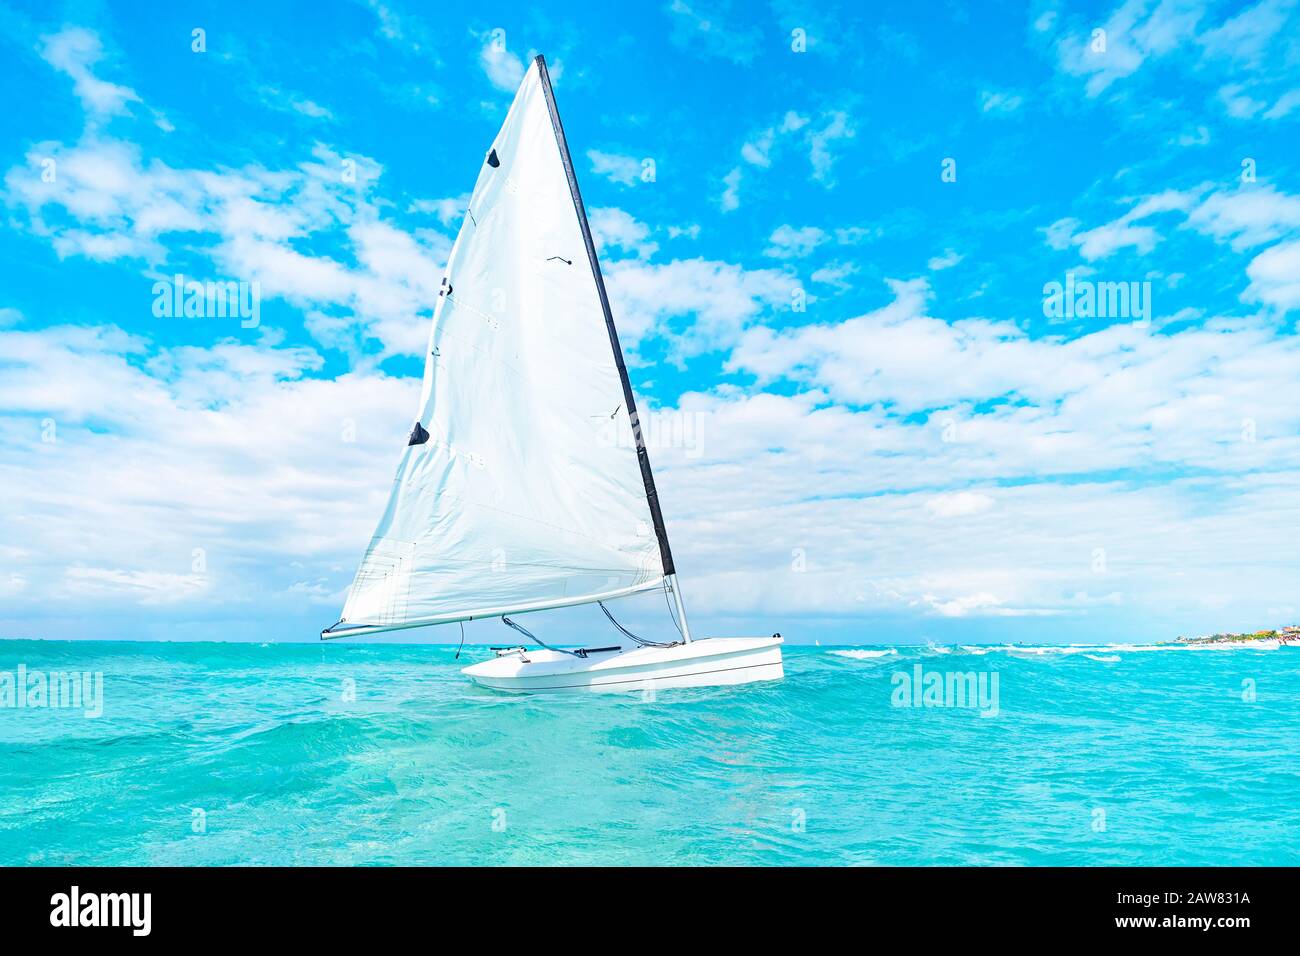 view of catamaran sailing in ocean open water. A catamaran with a white sail drifts through the turquoise waters of the Caribbean sea without people. Stock Photo